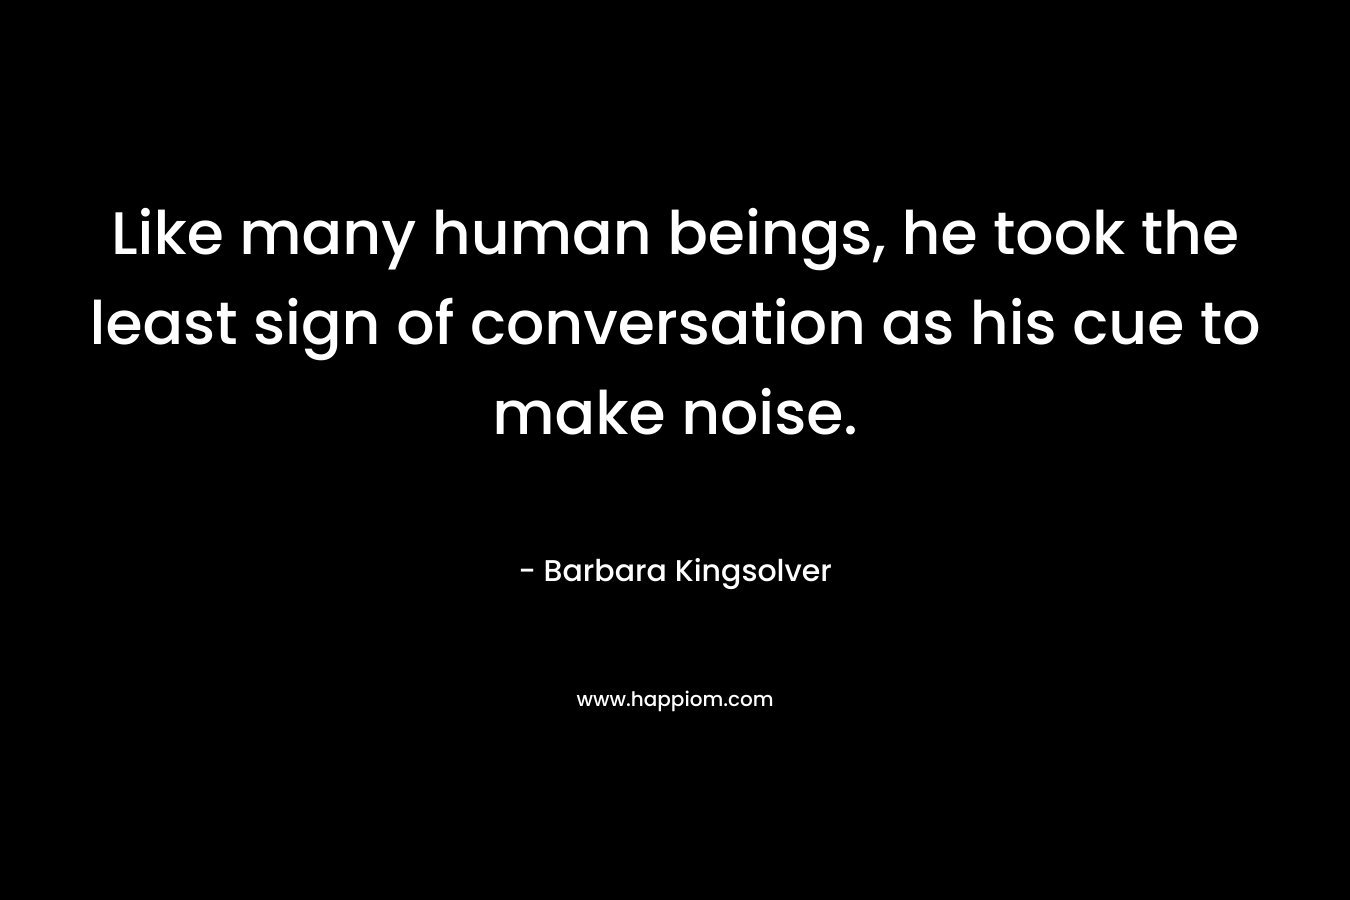 Like many human beings, he took the least sign of conversation as his cue to make noise. – Barbara Kingsolver